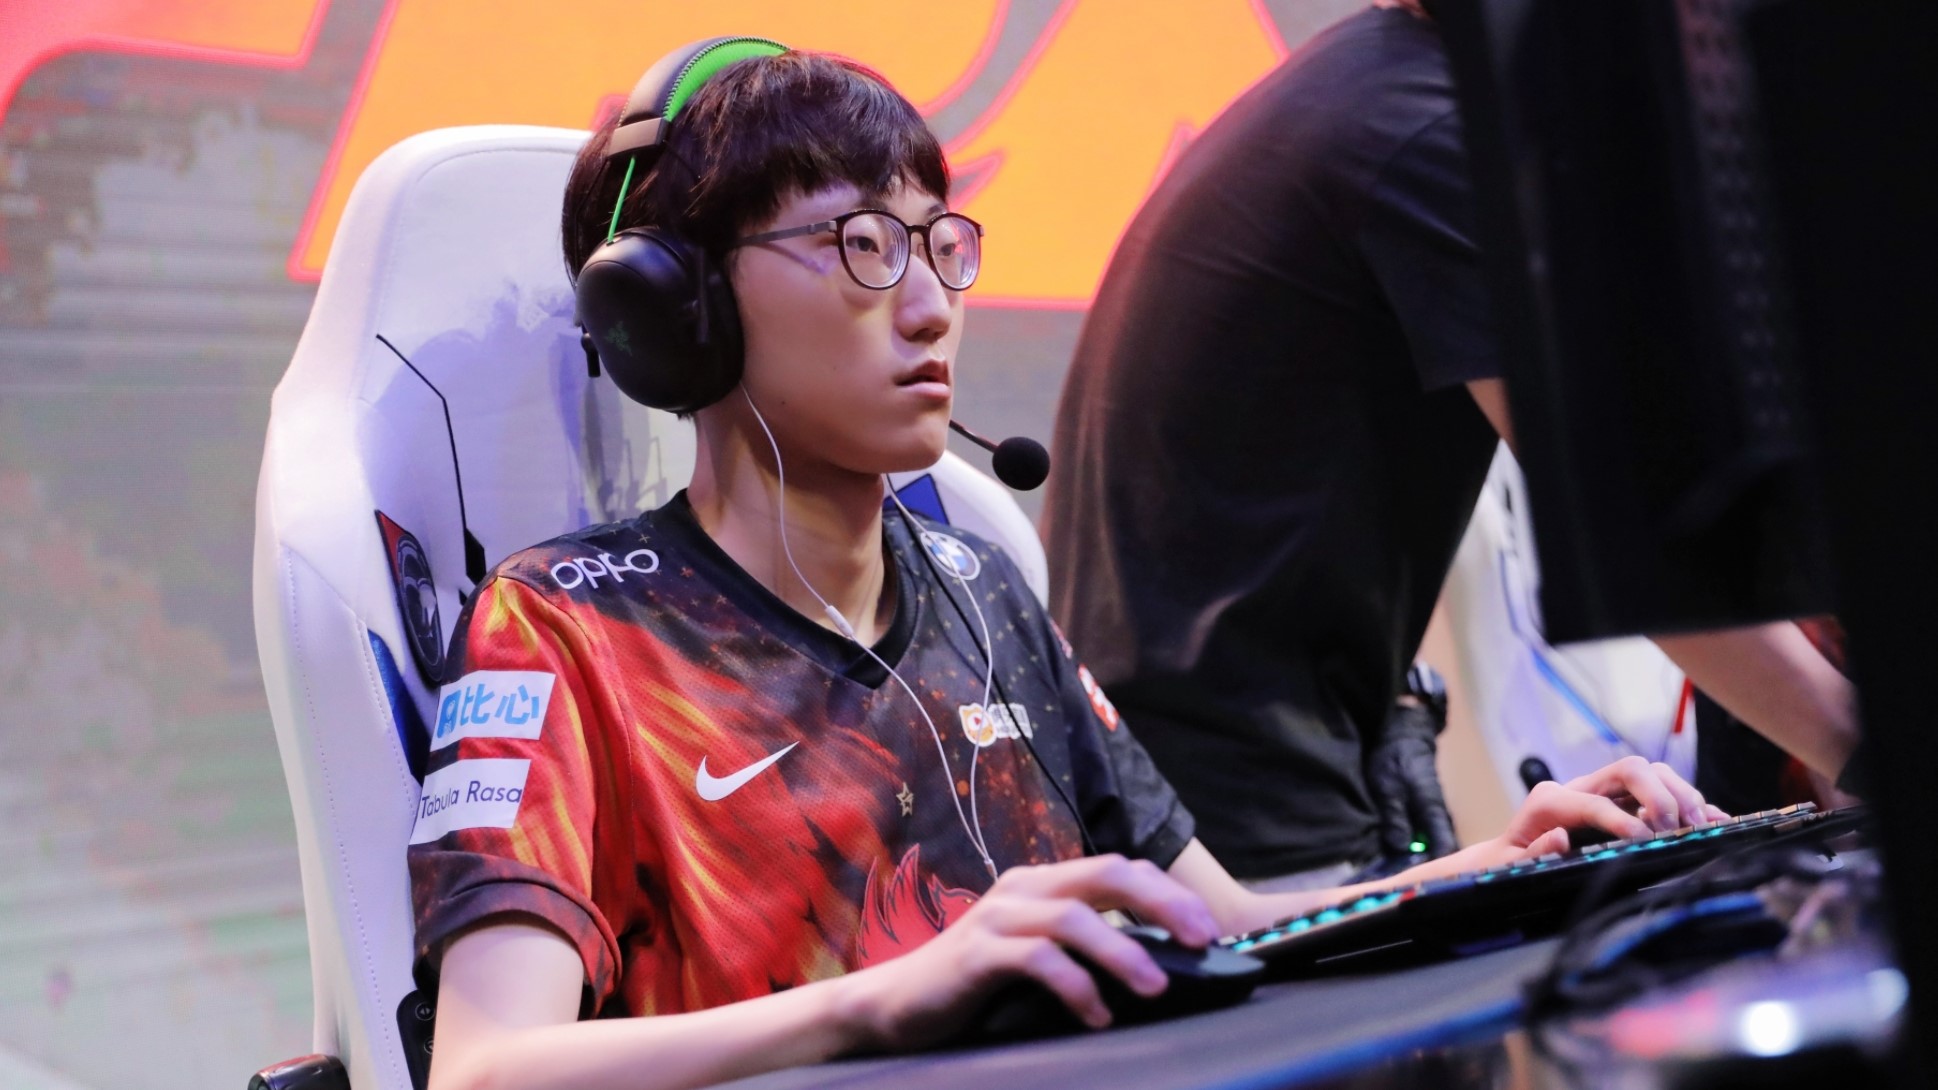 Nuguri Reported To Make A Return to LoL Pro Play